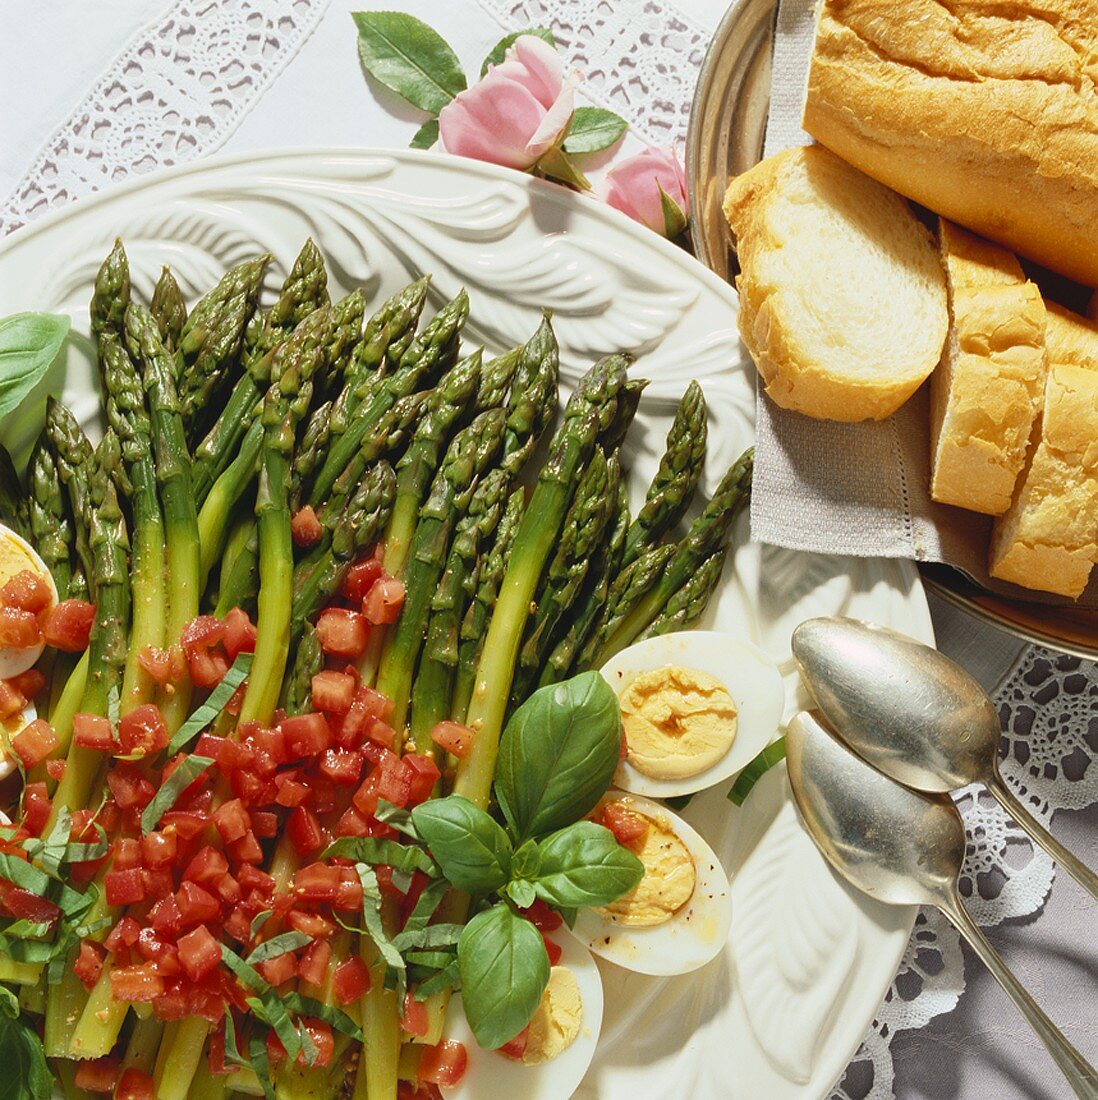 Green asparagus with boiled eggs and tomato vinaigrette